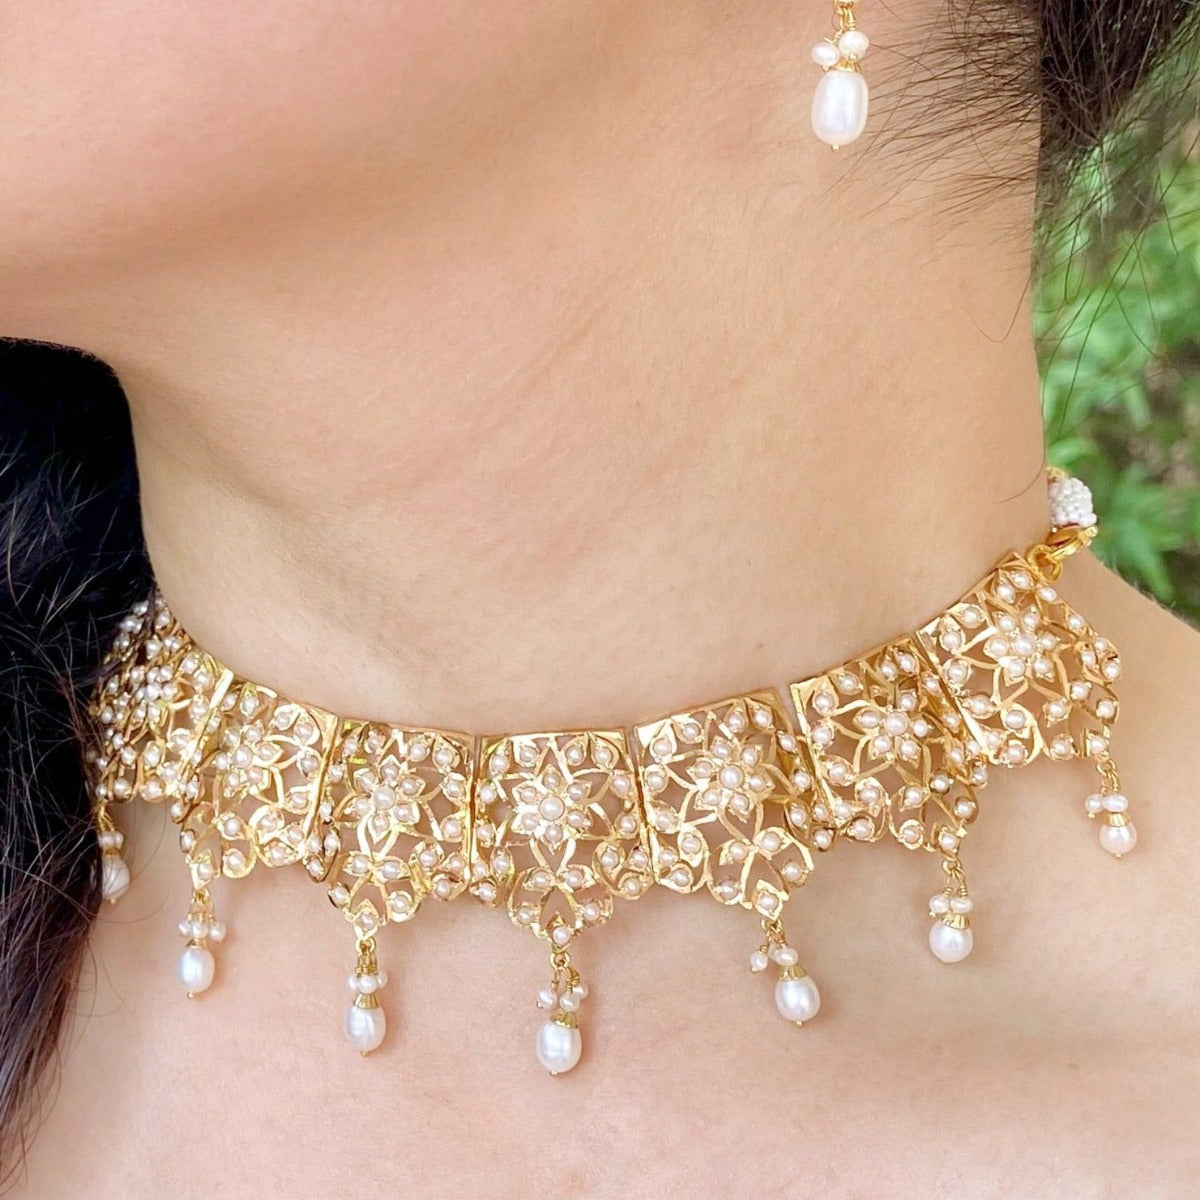 real pearl choker necklace and earrings set under 3 lakh